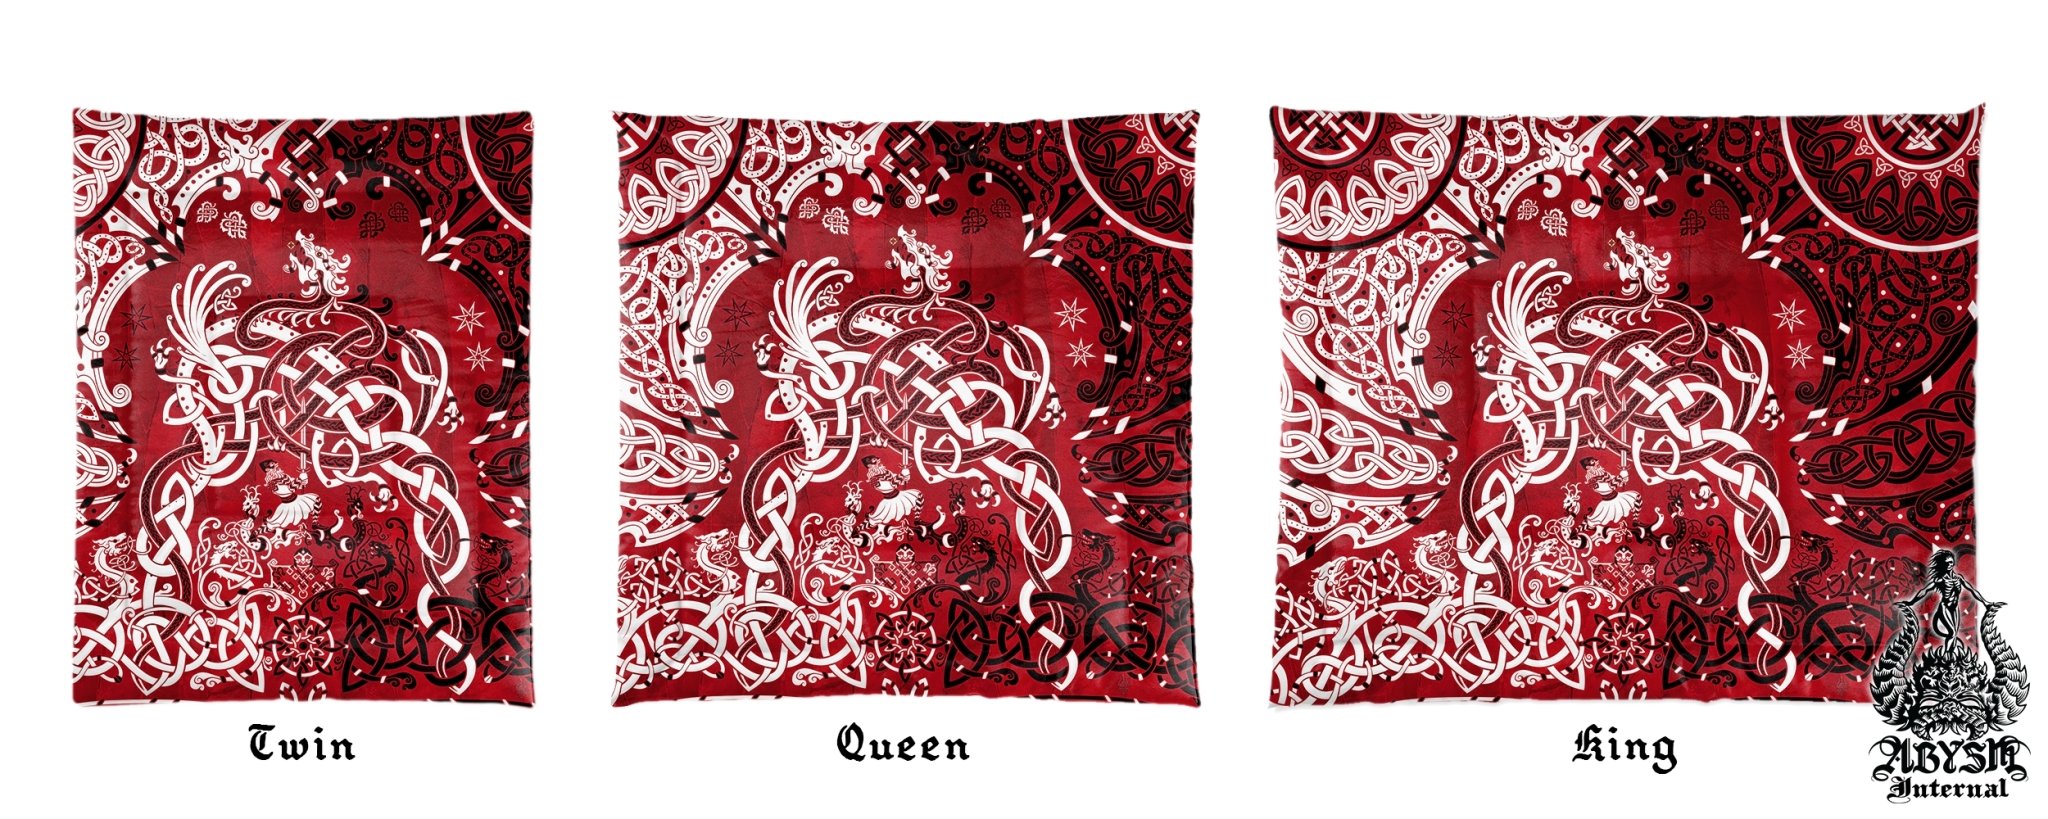 Viking Bedding Set, Comforter and Duvet, Norse Bed Cover and Bedroom Decor, Nordic Art, Sigurd kills Dragon Fafnir, King, Queen and Twin Size - Bloody Red - Abysm Internal